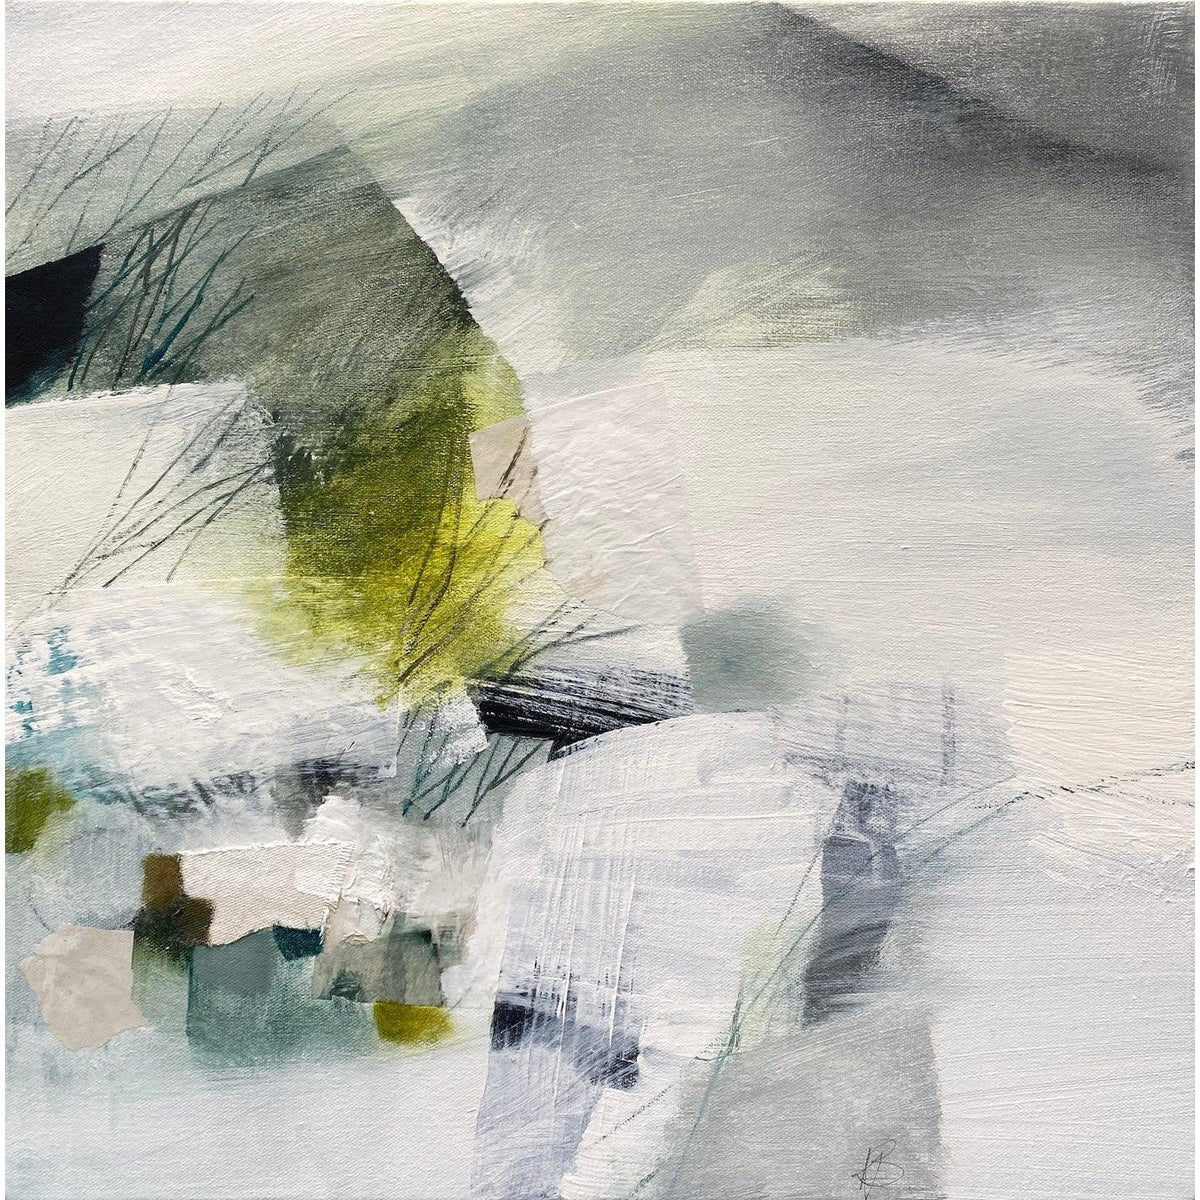 Hill Mist 4, mixed media by Karen Birchwood, available from Padstow Gallery, Cornwall